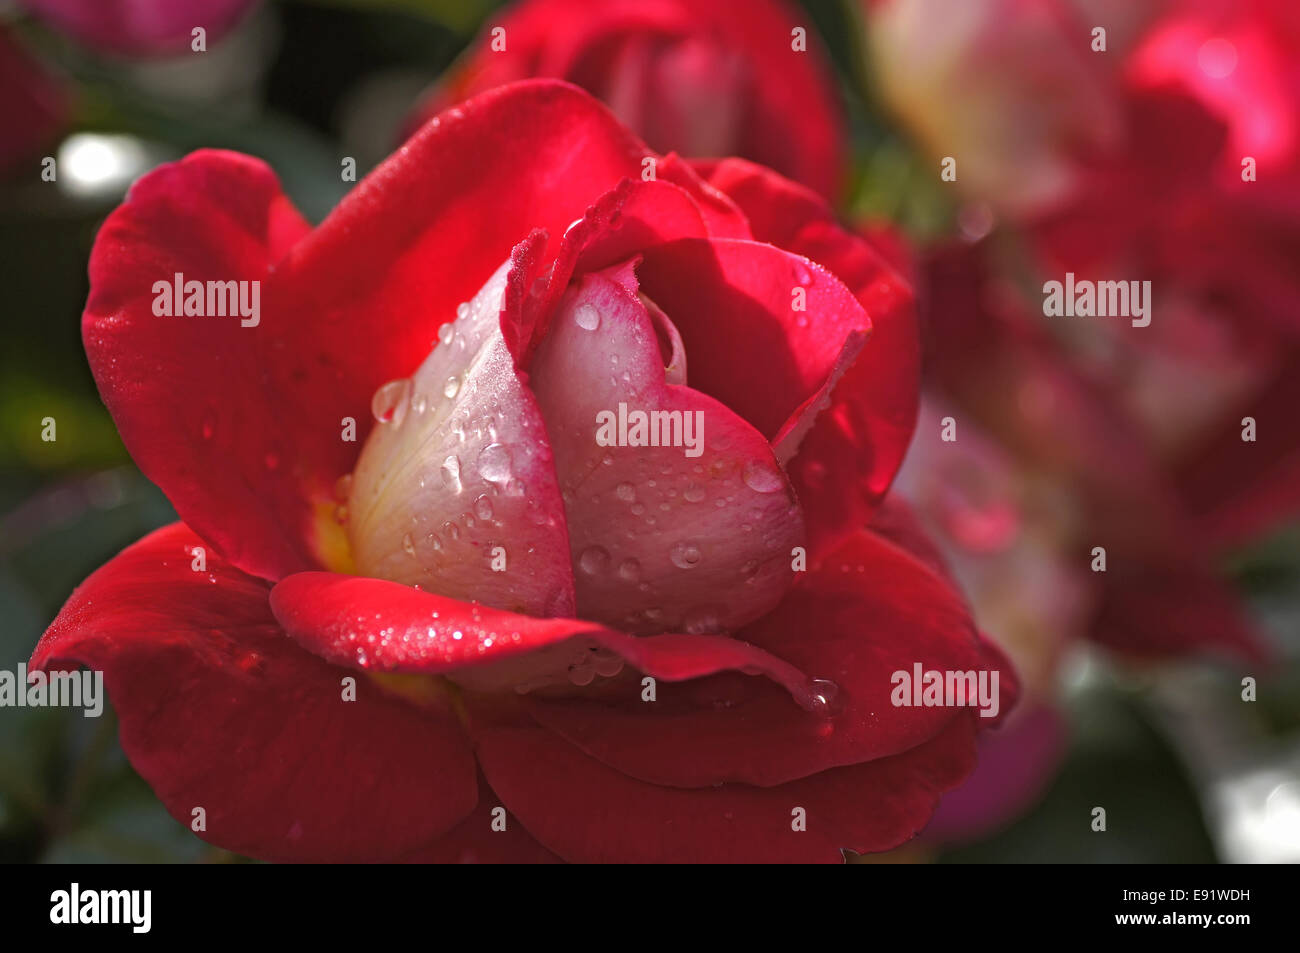 Red-white rose with raindrops Stock Photo